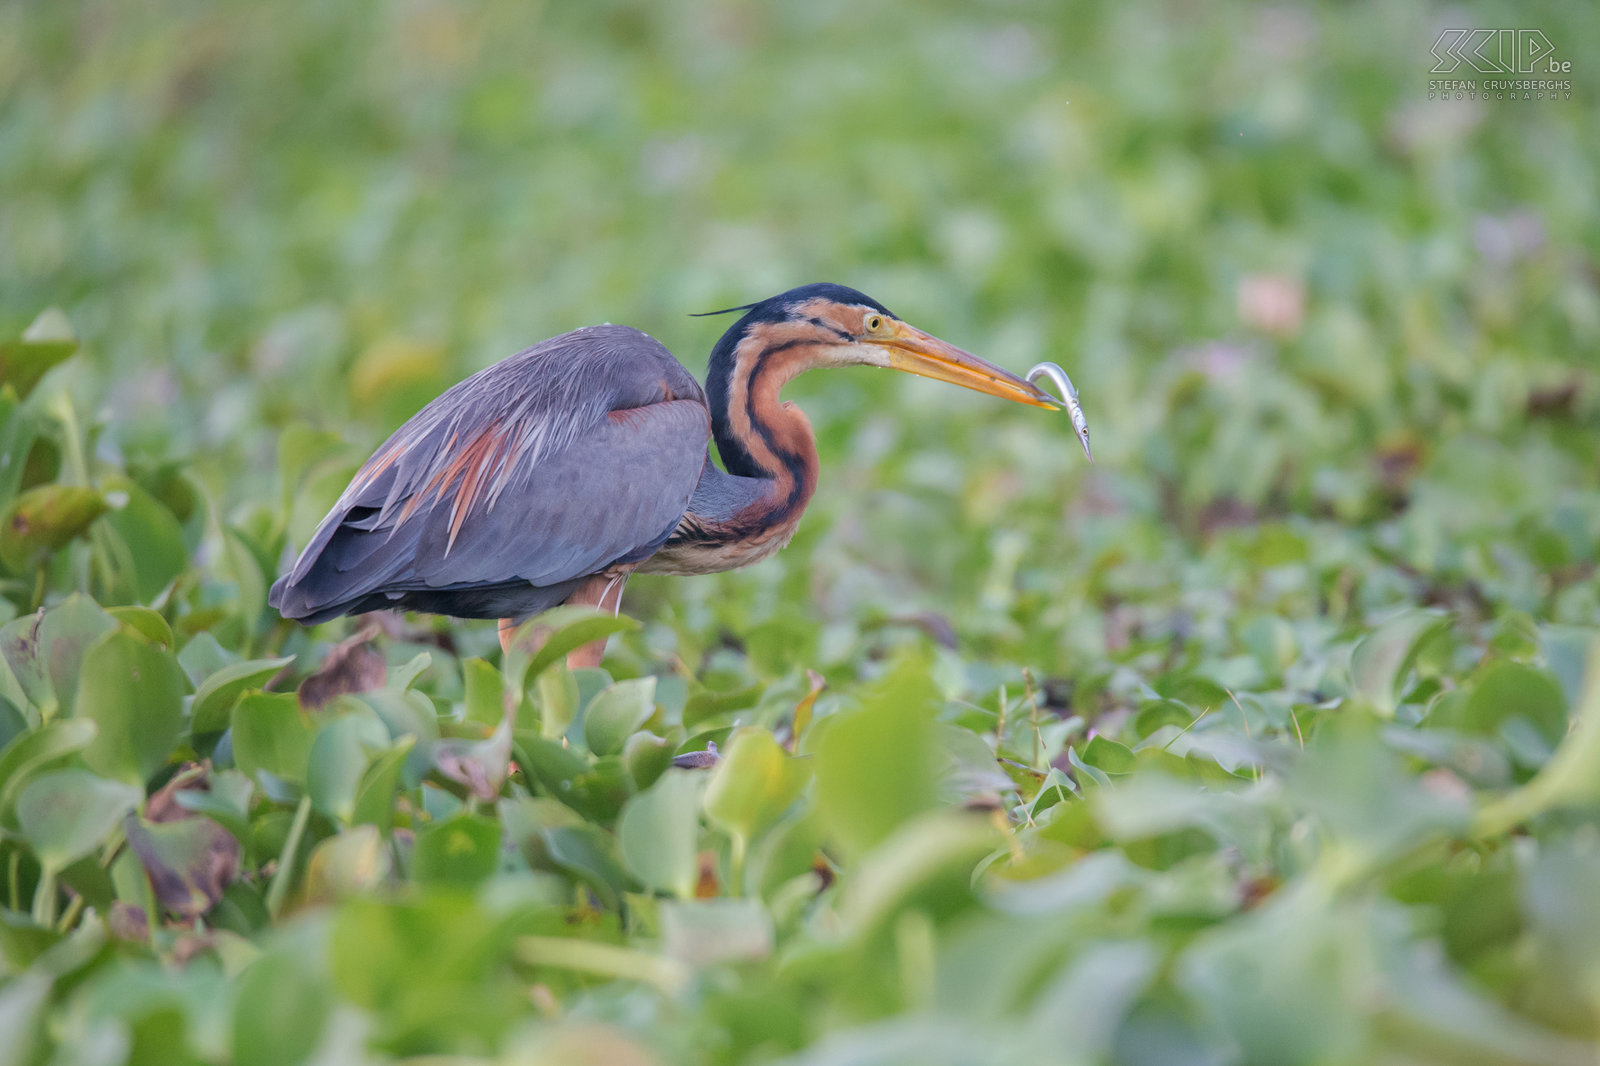 Kumarakom - Purple heron The Kumarakom Bird Sanctuary is near the Vembanad Lake,  the largest freshwater lake in the state of Kerala. It is the a part of the famous backwaters of Kerala and many species of migratory birds visit this place. We spotted a purple heron (Ardea purpurea) while catching a fish.<br />
 Stefan Cruysberghs